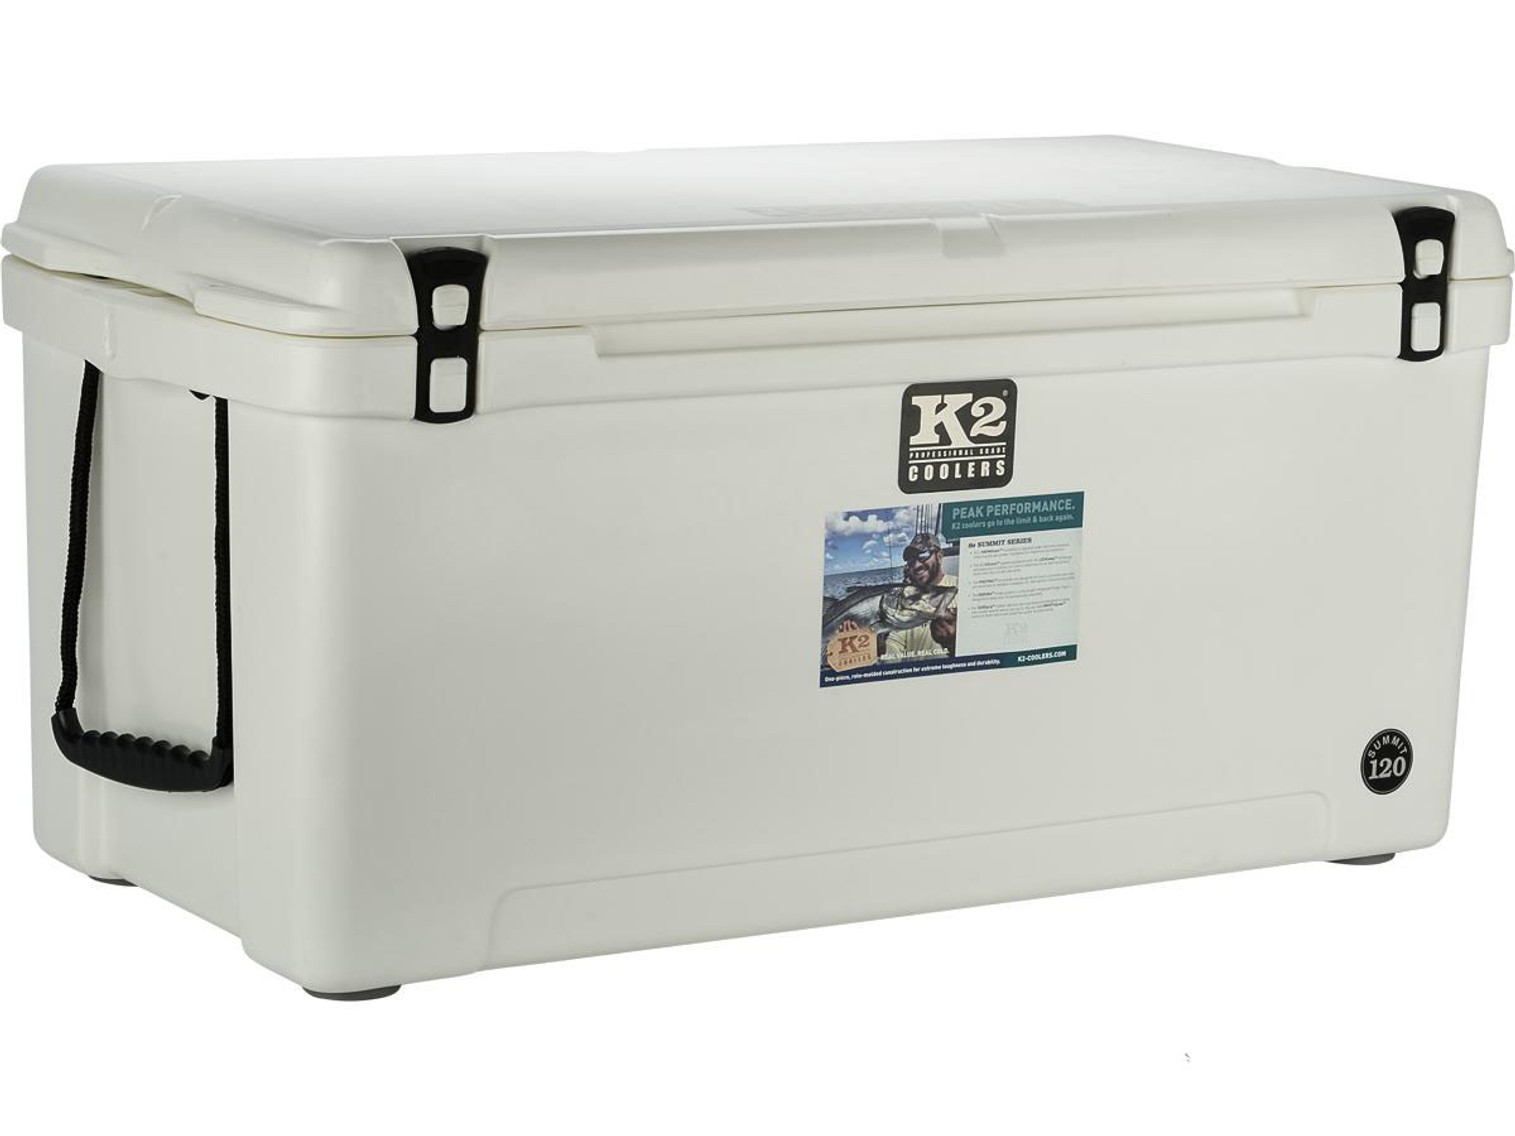 K2 Coolers Summit 120 Ice Chest (Color: Glacier White)